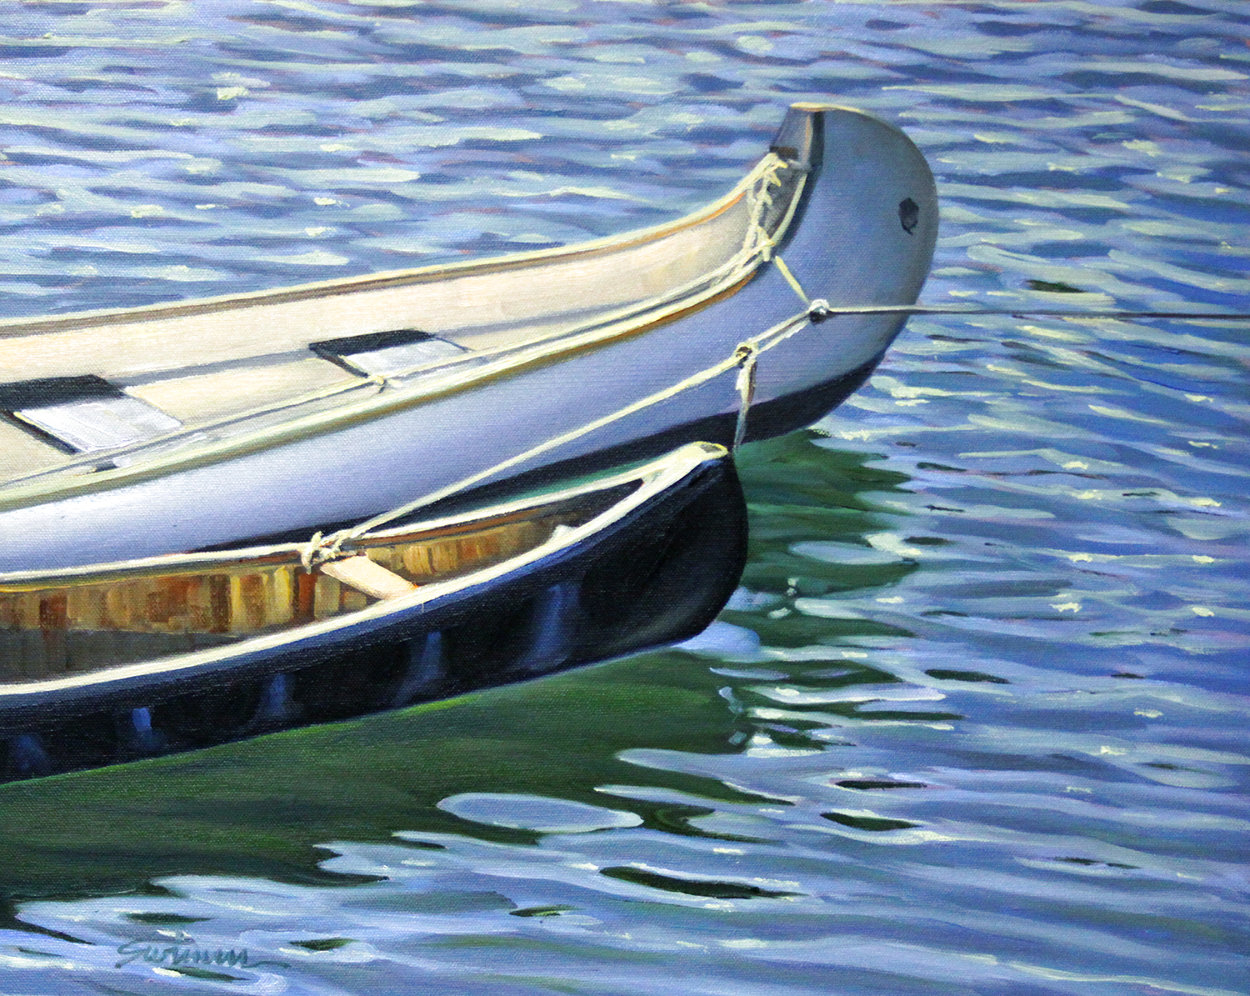 Canoe Reflections 2022 18x22 Original Painting by Tom Swimm